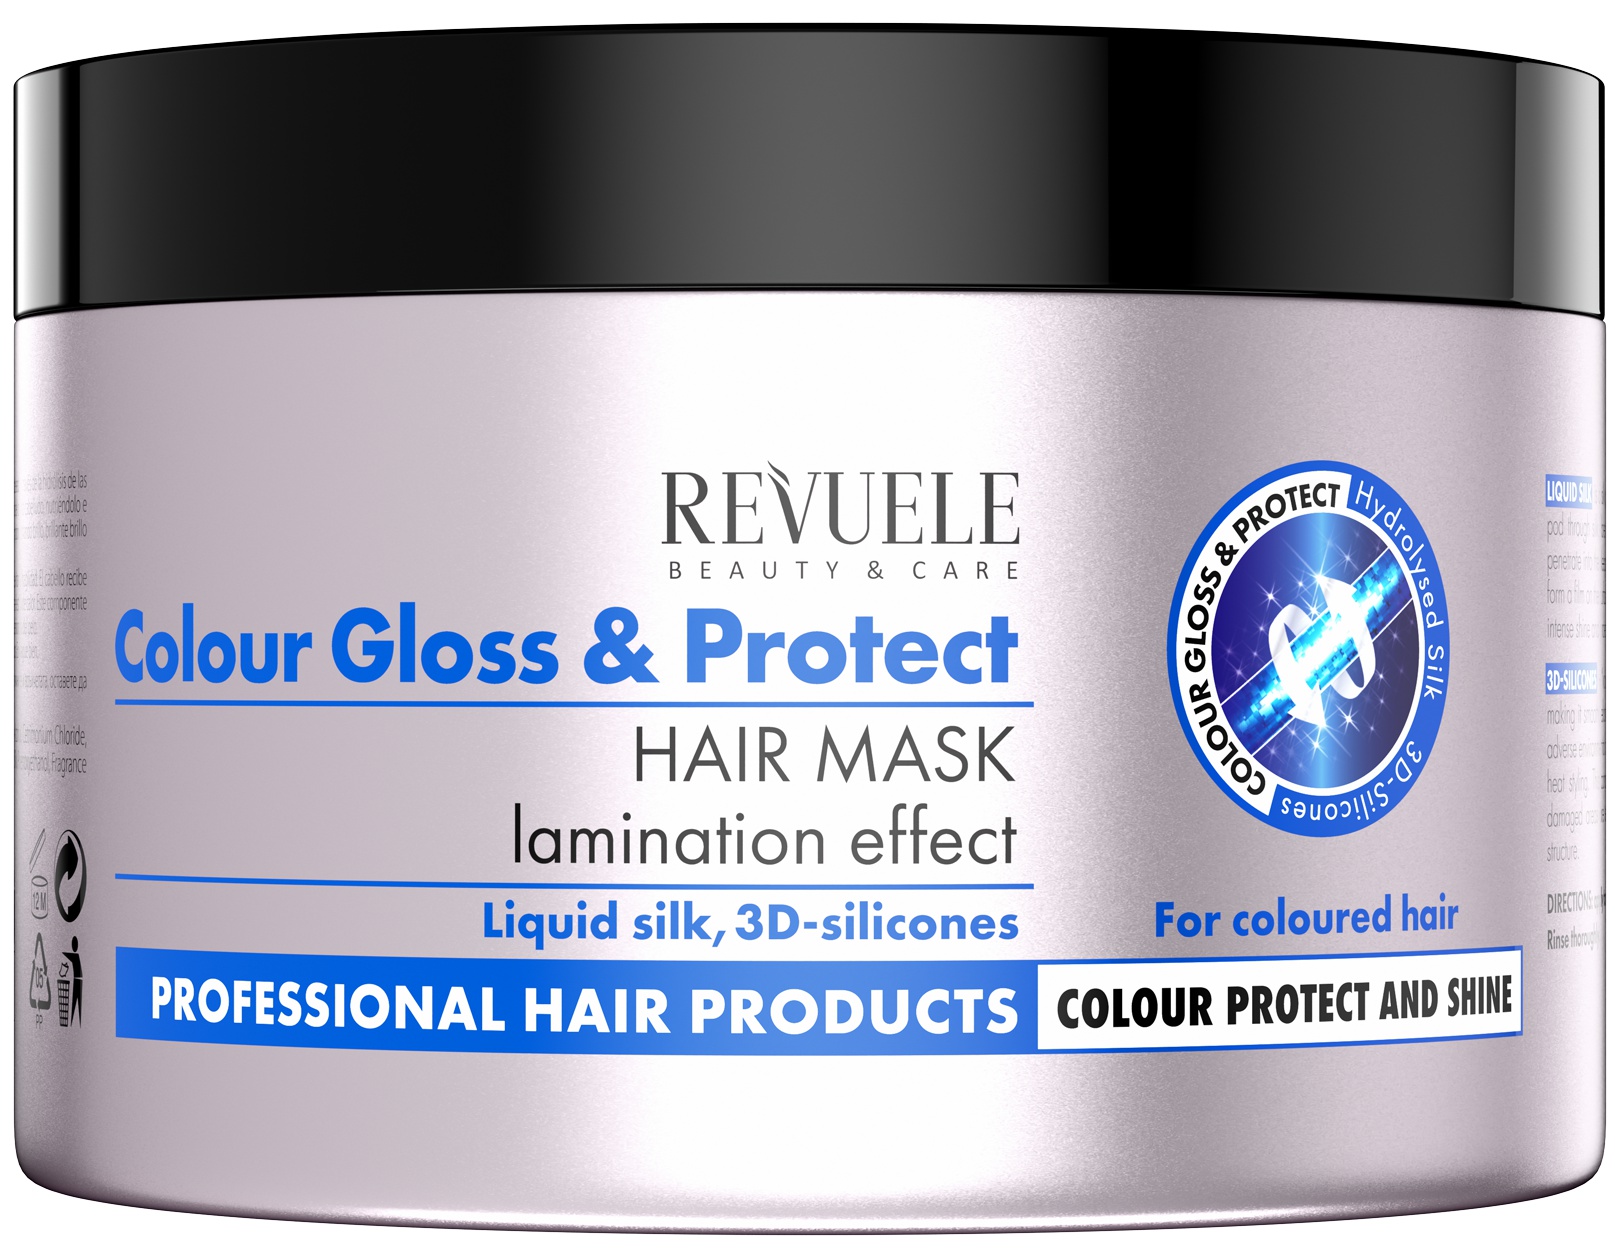 Revuele Colour Gloss & Protect Hair Mask